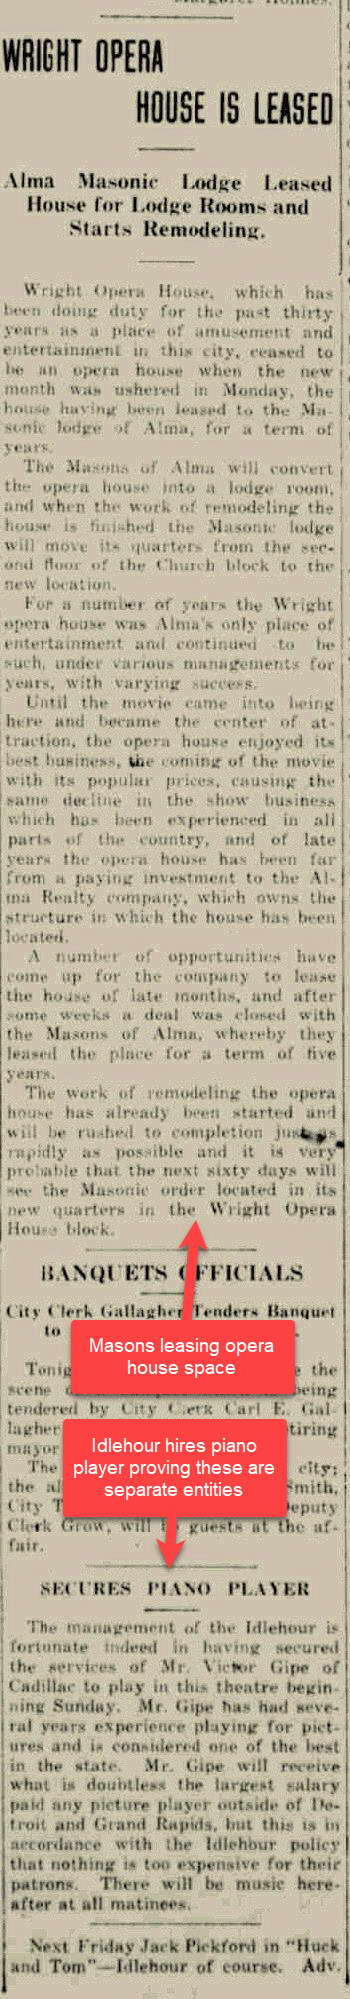 Regent Theater - April 4 1918 Articles Discussing Opera House And Theater